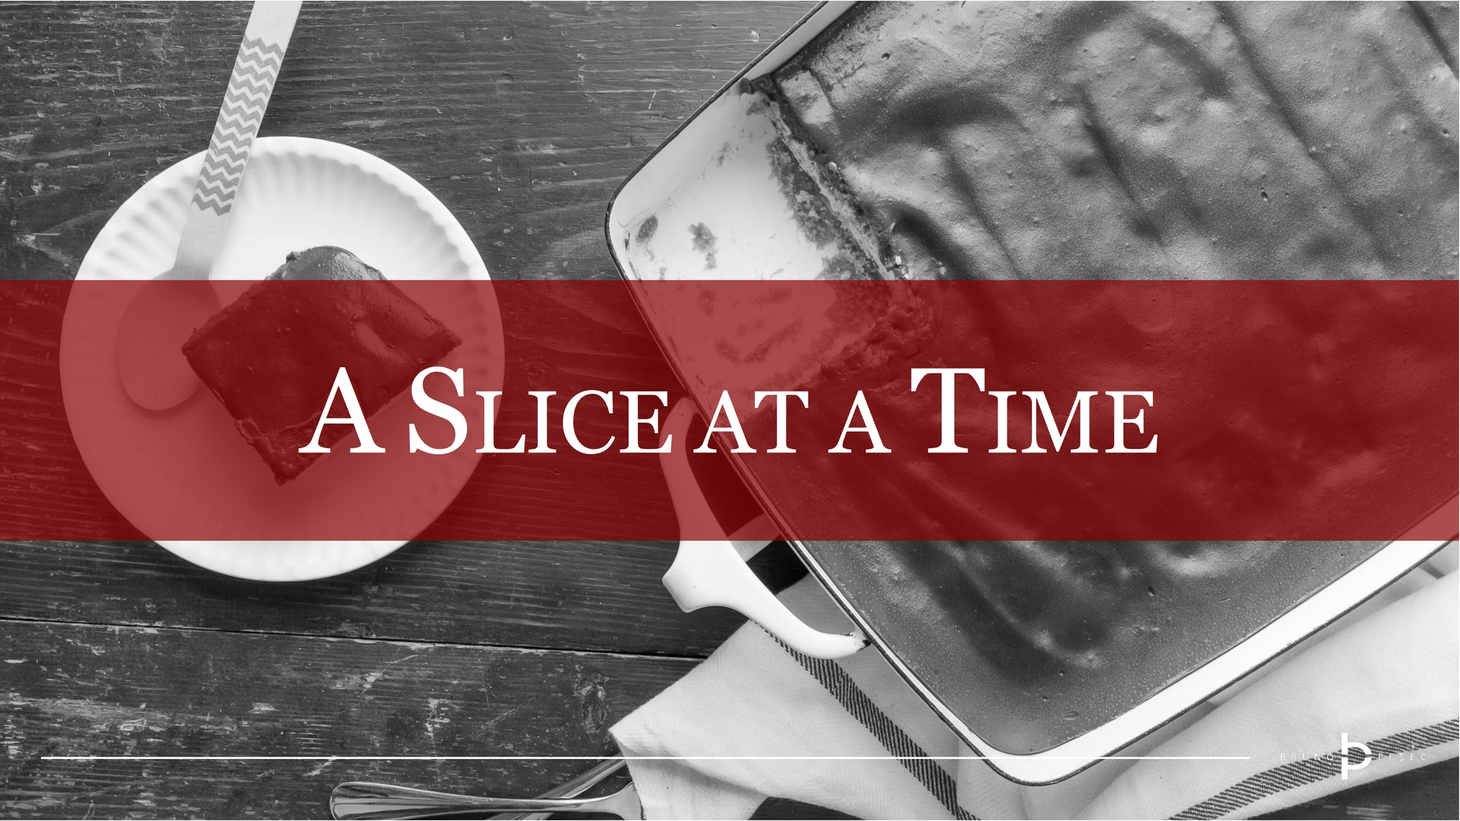 A slice at a time